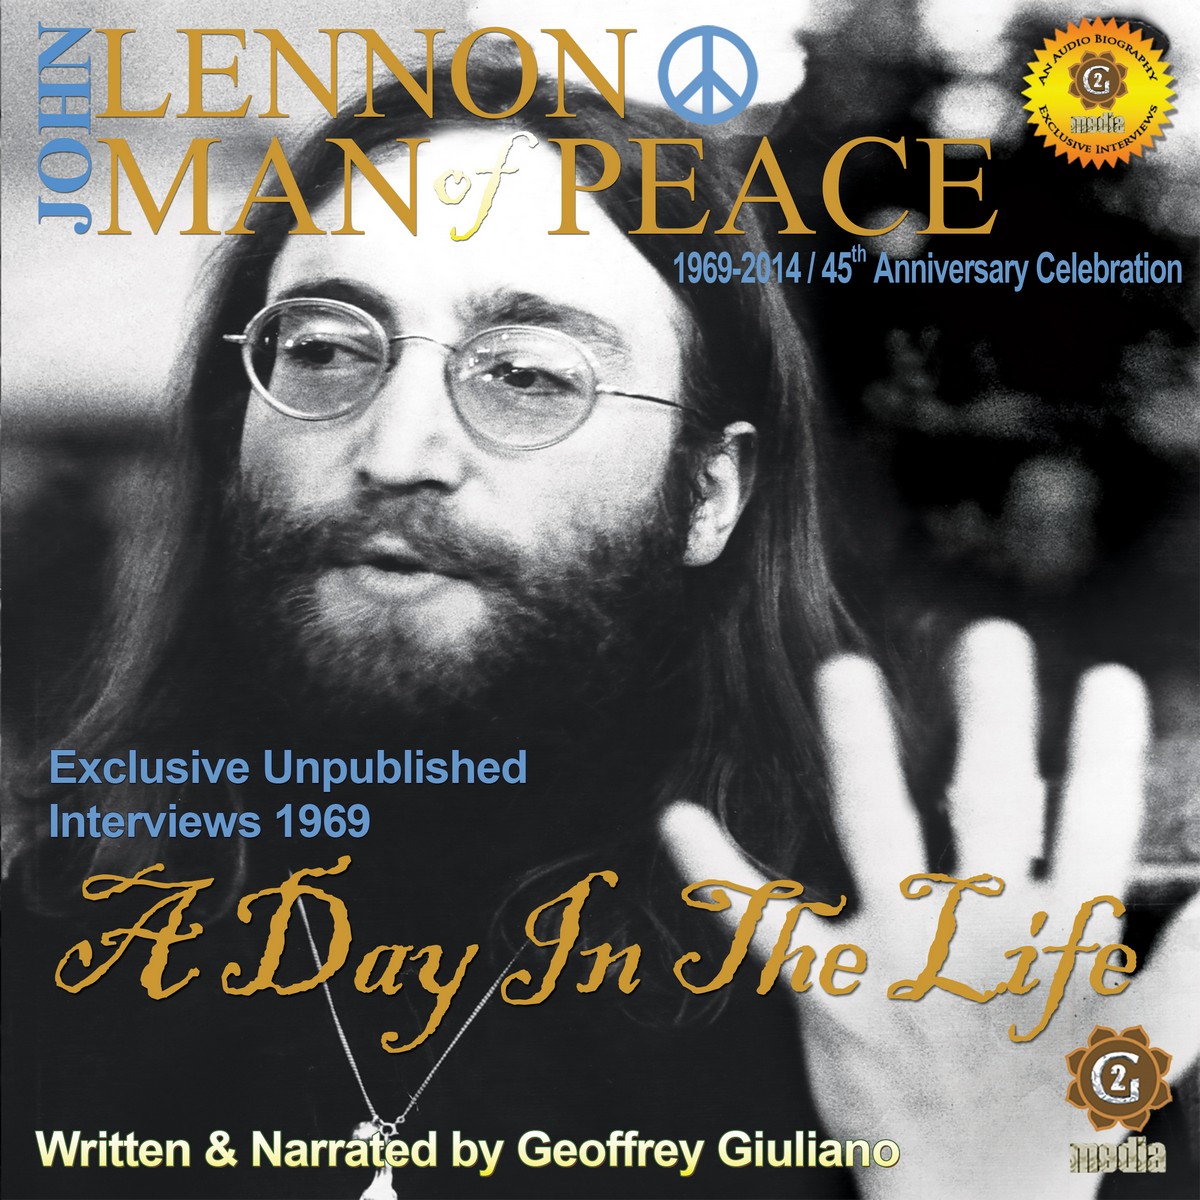 John Lennon Man of Peace, Part 3: A Day in the Life